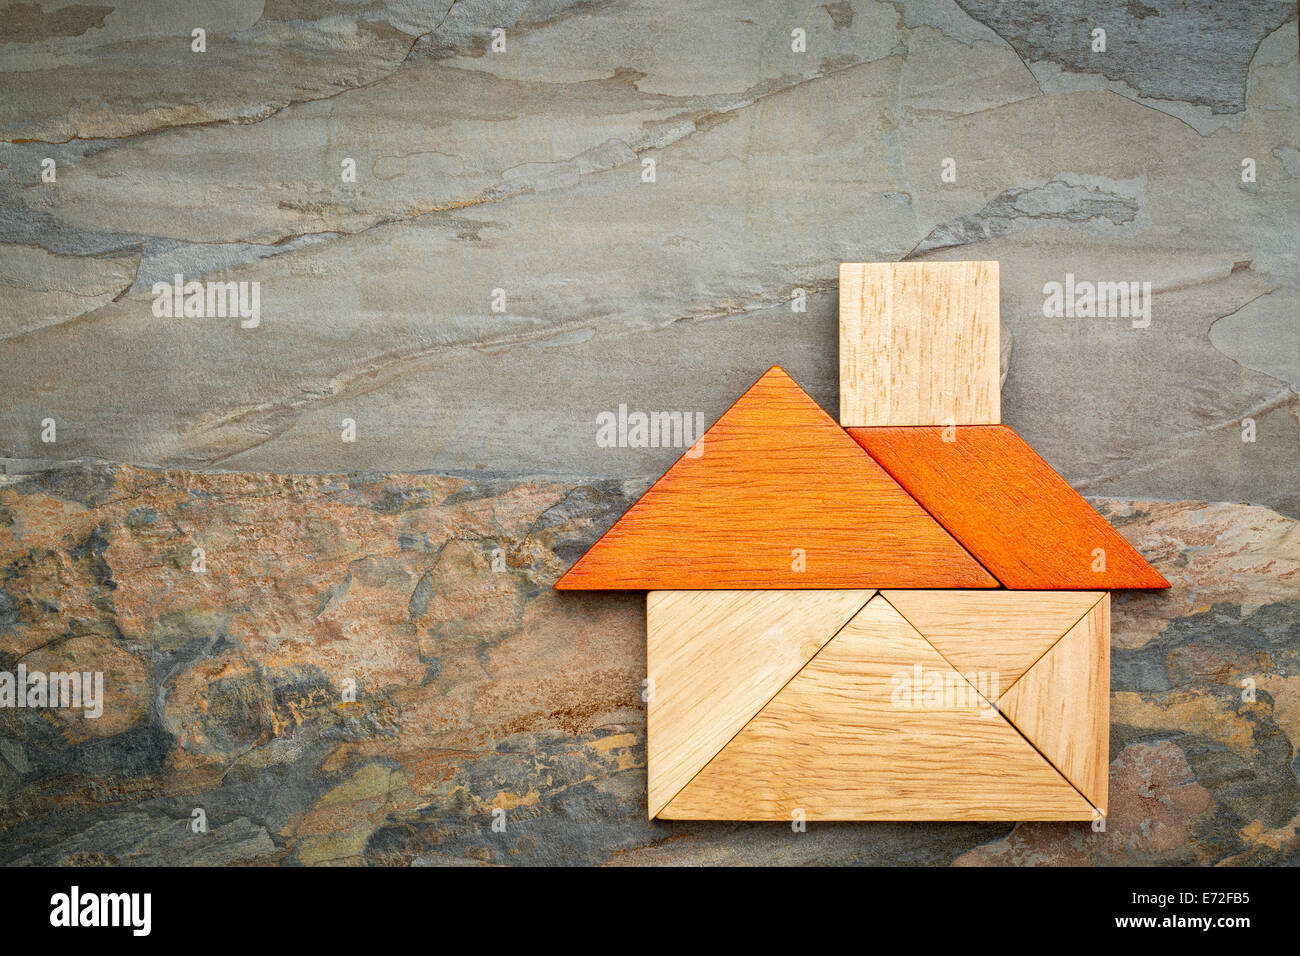 abstract picture of a house built from seven tangram wooden pieces against slate rock background Stock Photo